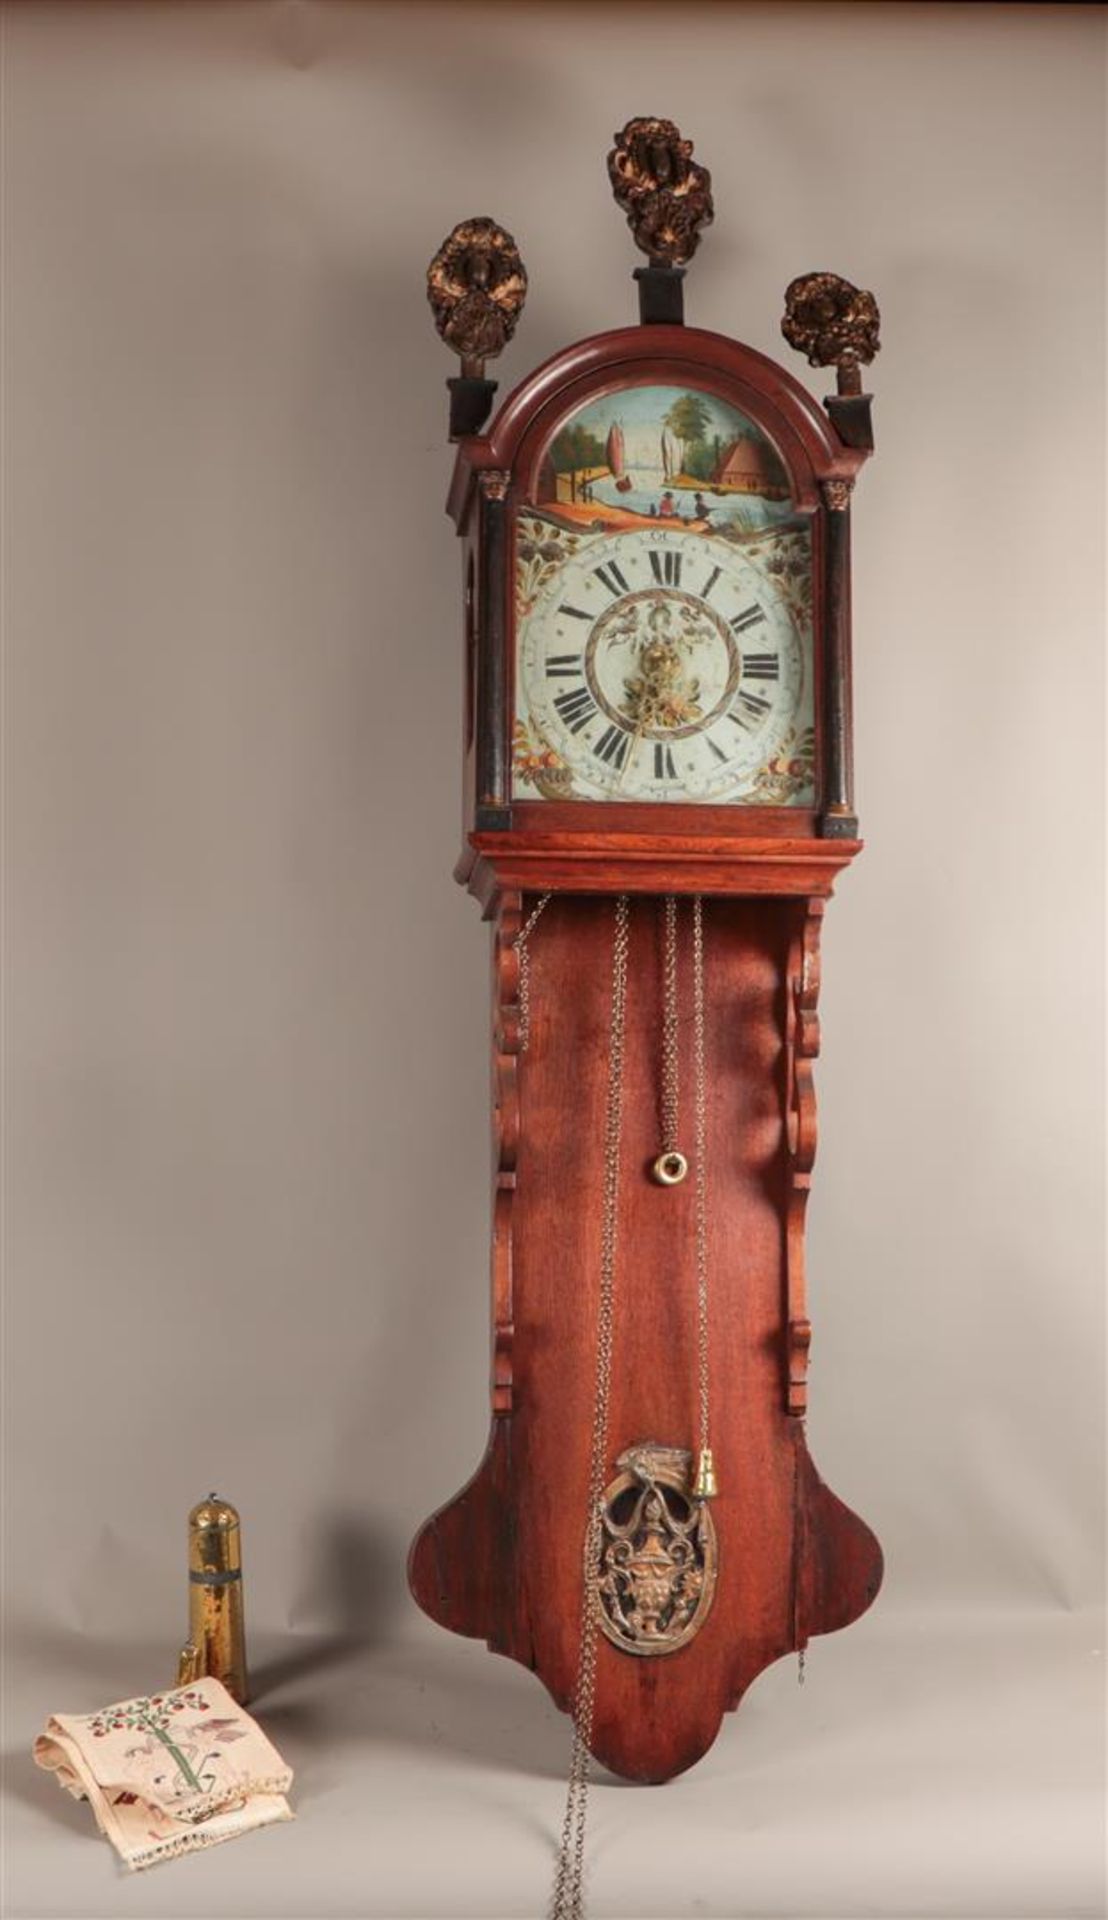 A "Frisian" hanging clock with alarm function.